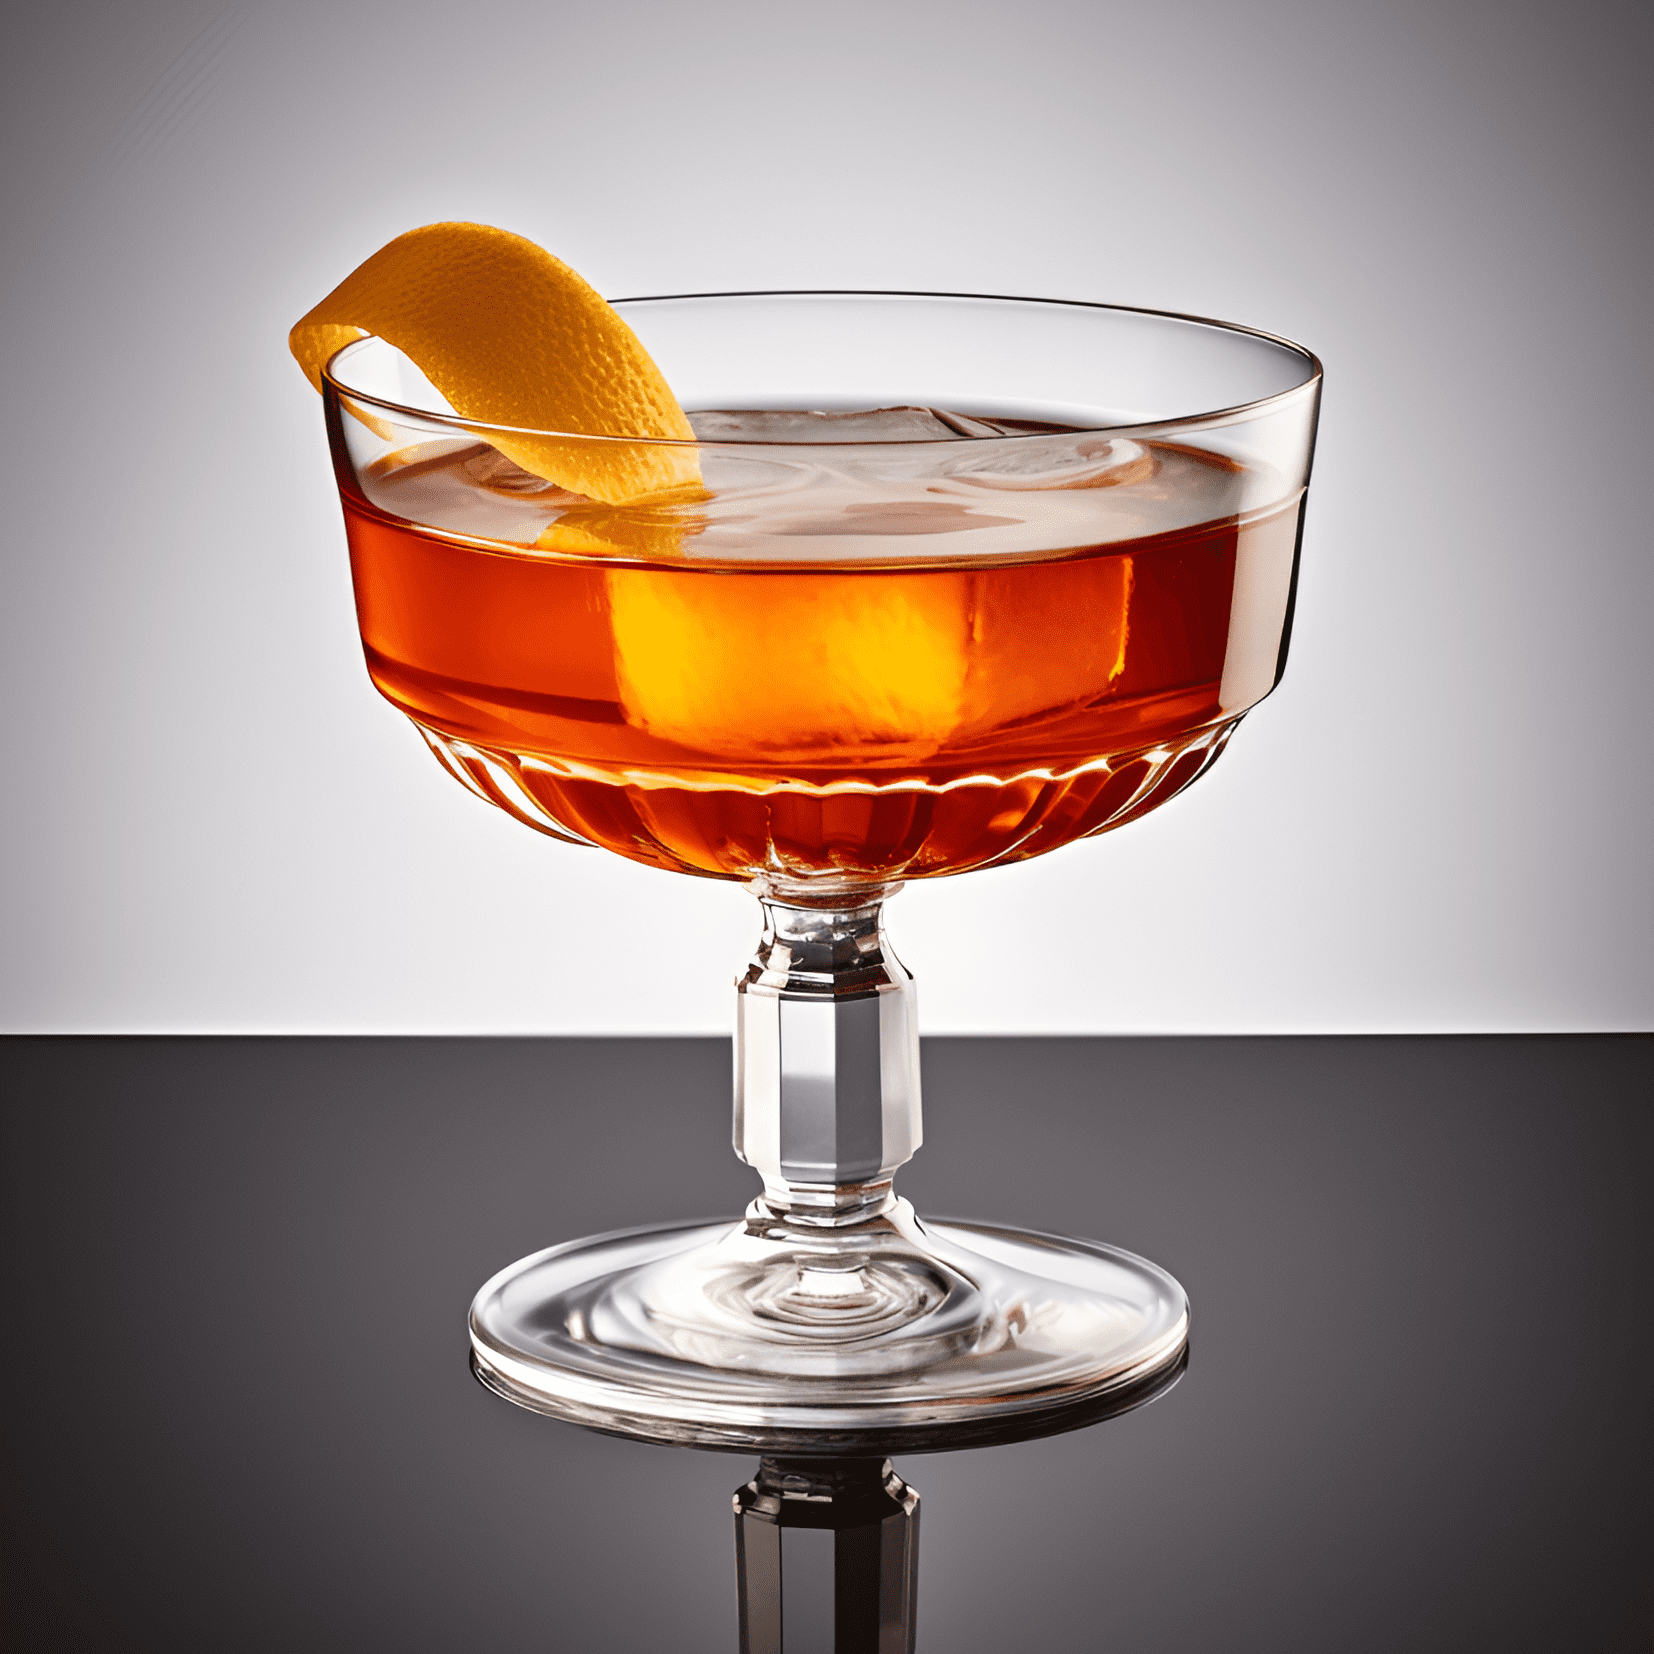 Old Pal Cocktail Recipe - The Old Pal is a strong, spirit-forward cocktail with a hint of bitterness. It has a dry, slightly spicy taste from the rye whiskey, balanced by the herbal and bitter notes of the Campari and dry vermouth.